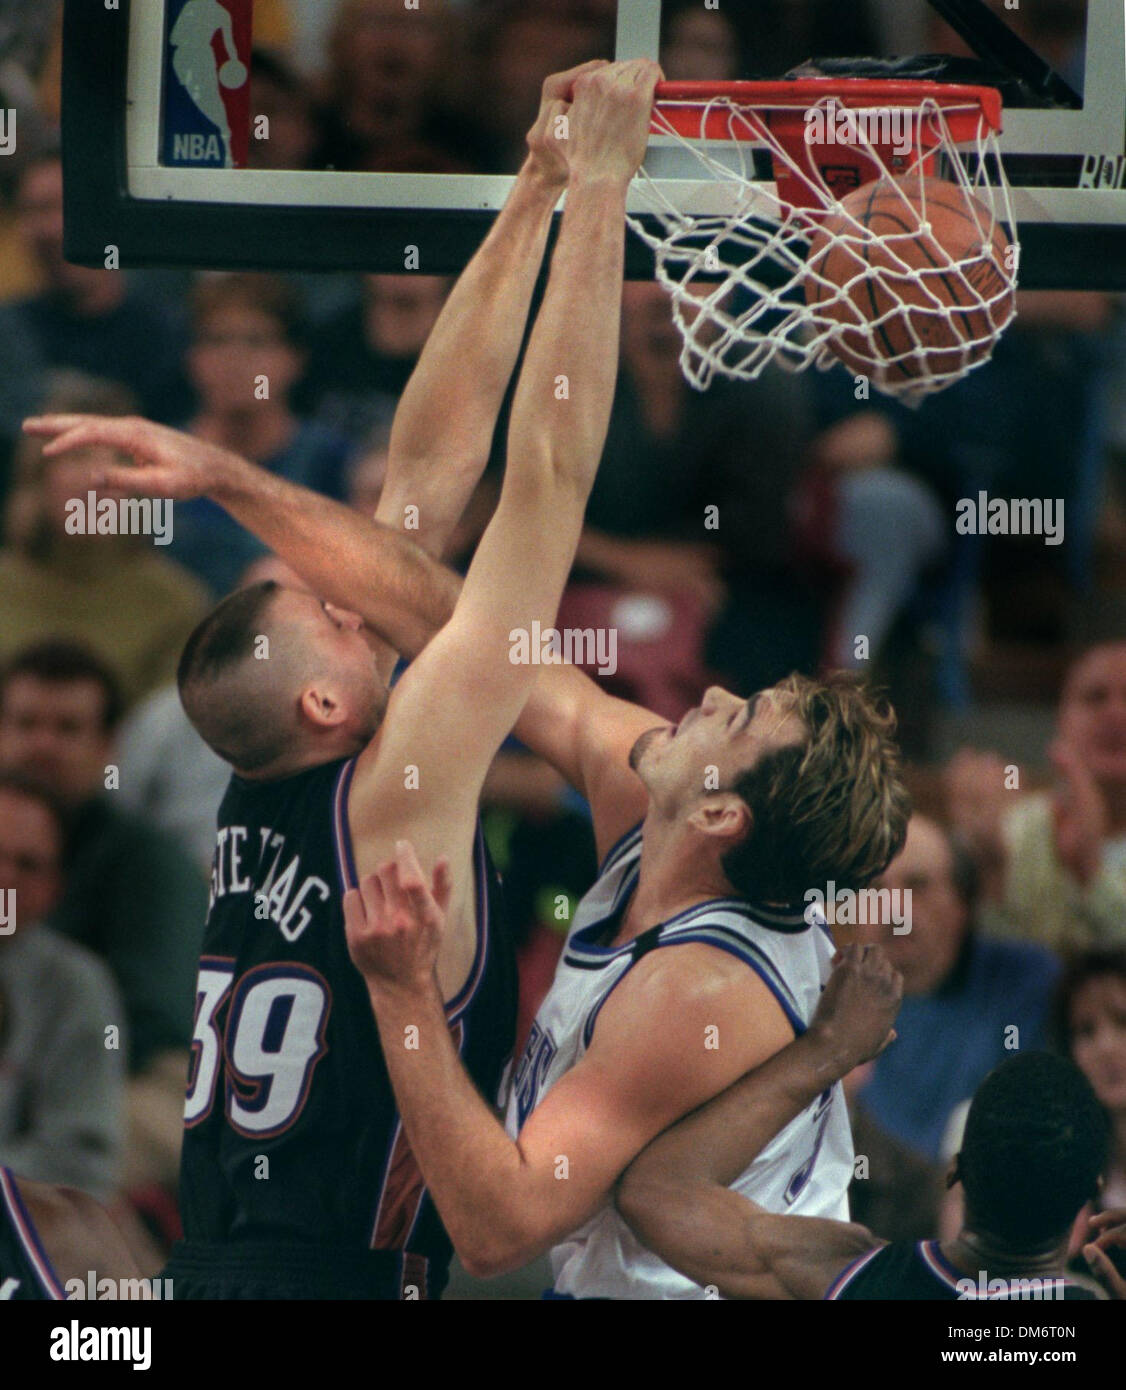 During the 3rd period Greg Ostertag dunks the ball over Scot Pollard of the Kings during their game at Arco Arena 1/22/00. Sacramento Bee/Bryan Patrick  /ZUMA Press Stock Photo